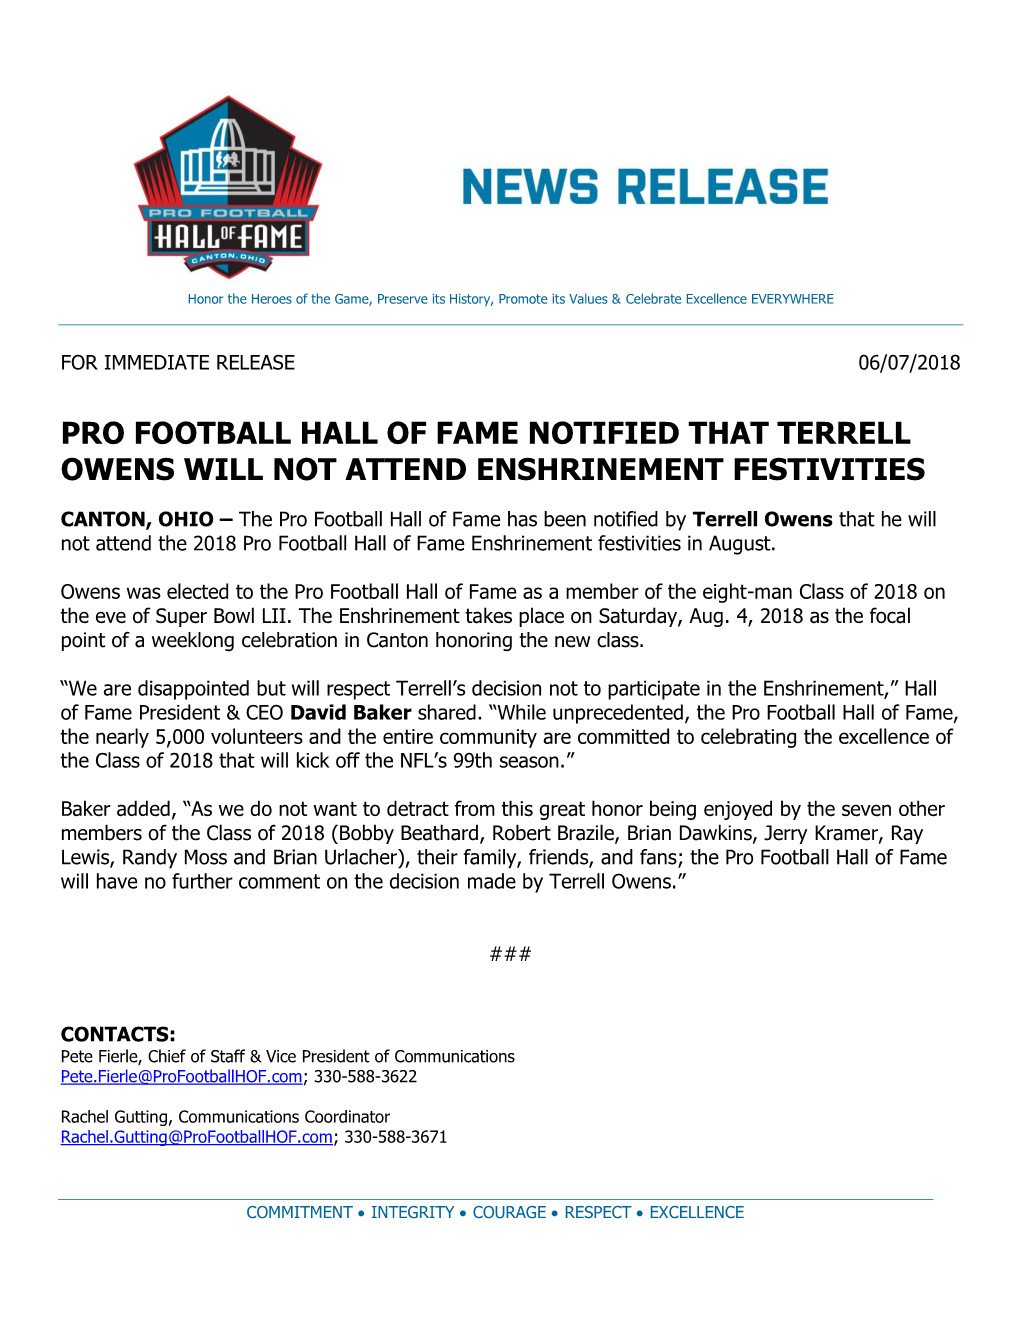 Pro Football Hall of Fame Notified That Terrell Owens Will Not Attend Enshrinement Festivities